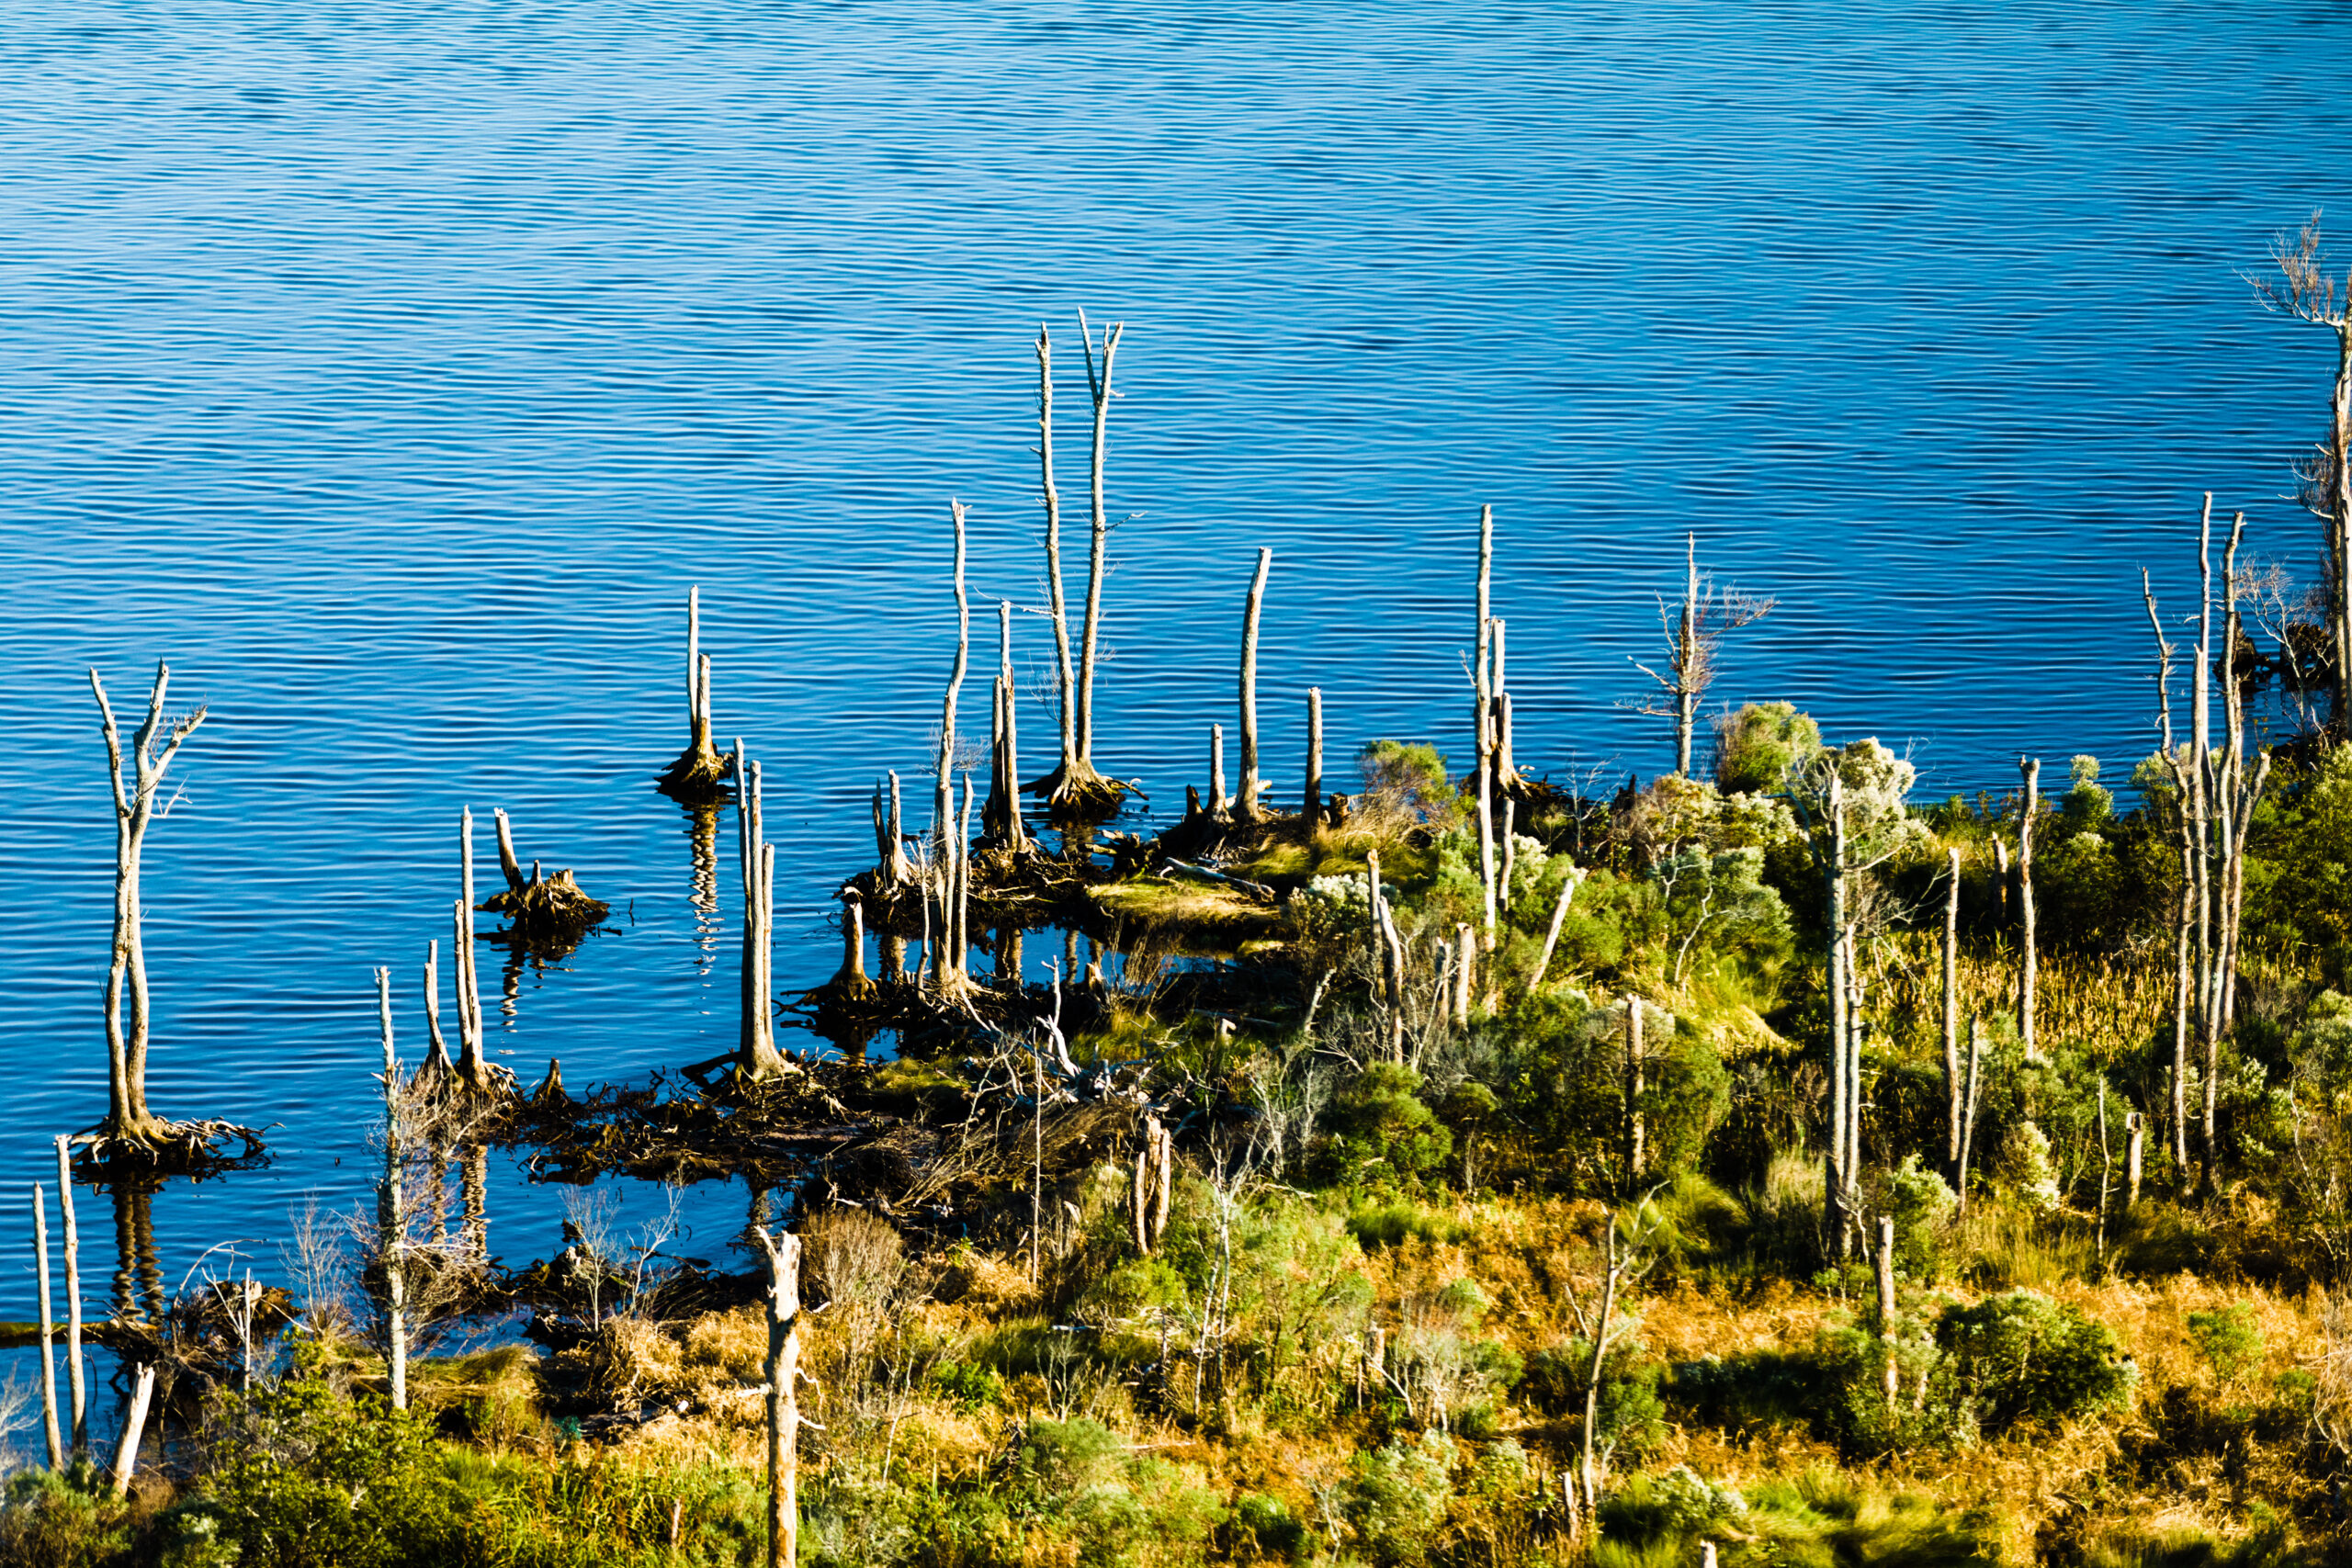 Ghost Forest of dying trees in an estuary